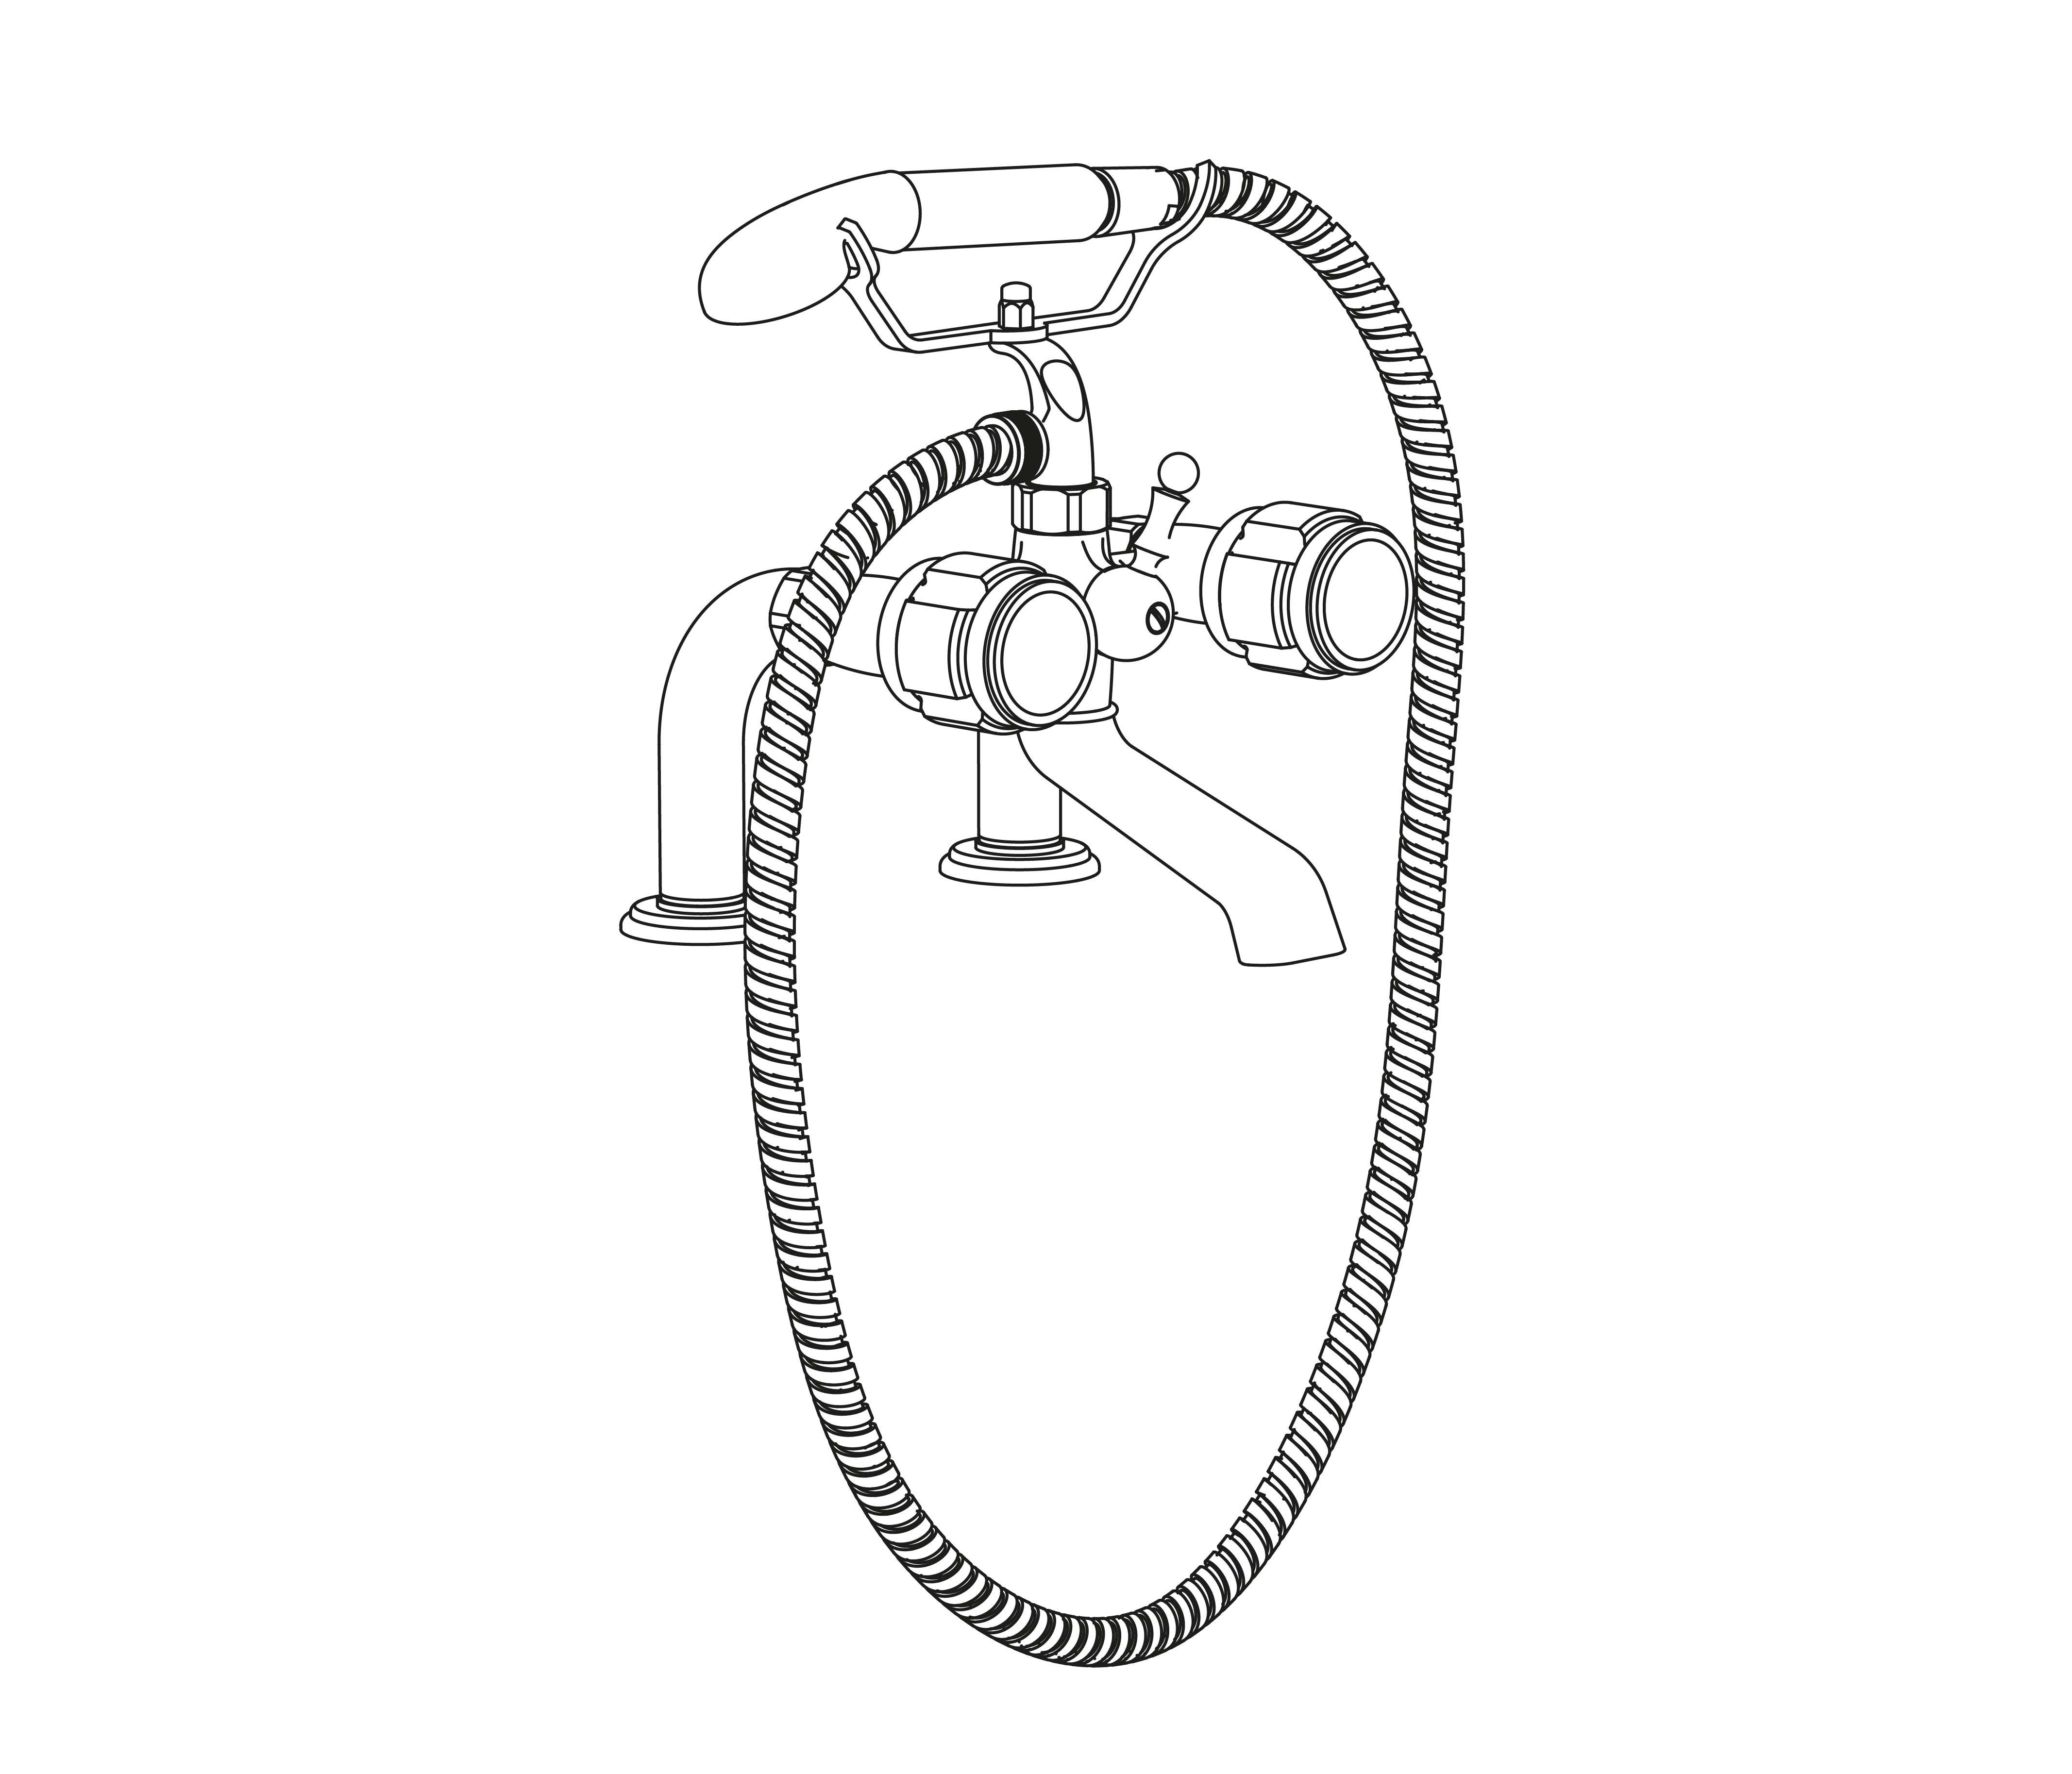 S83-3306 Rim mounted bath and shower mixer